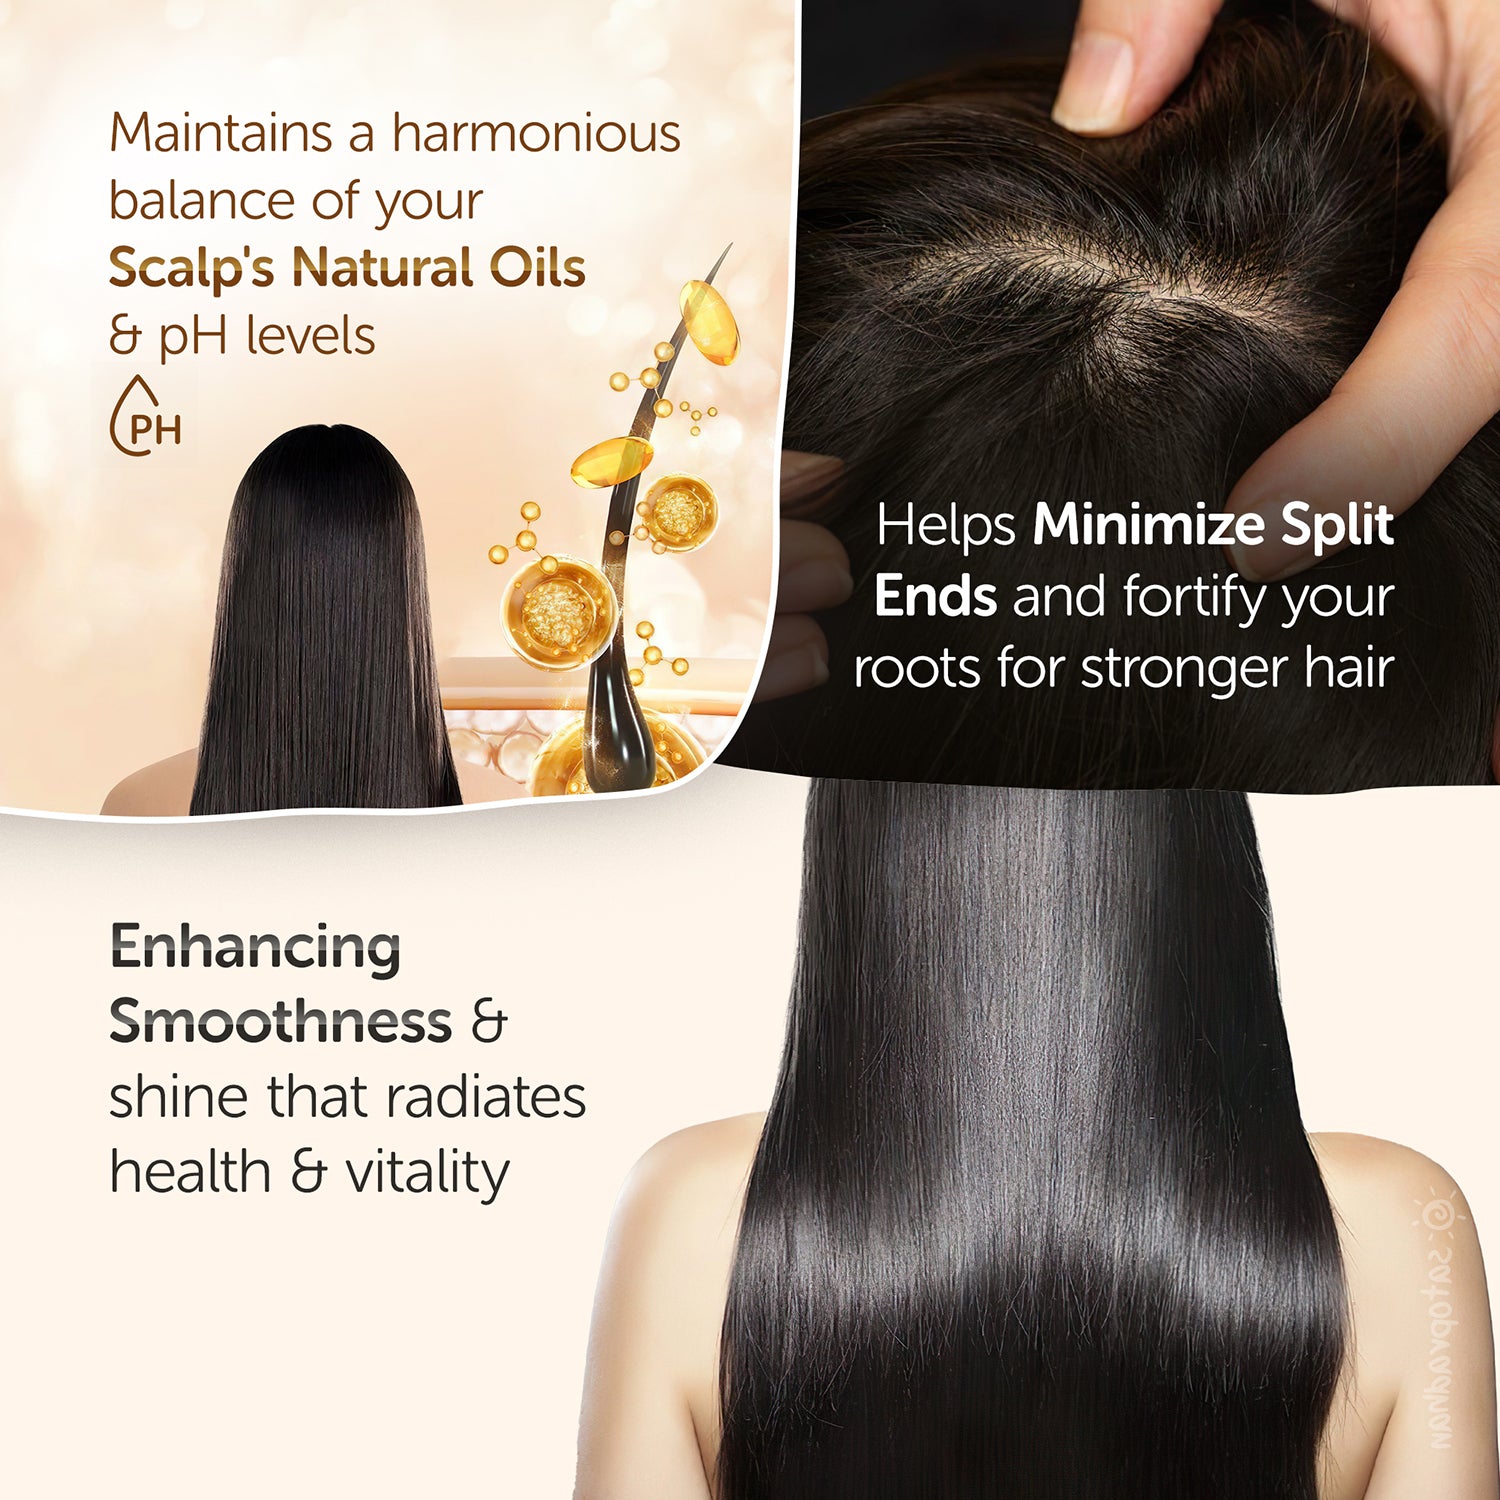 Helps in balancing scalp's natural oil & enhancing smoothness by minimizing split-ends 